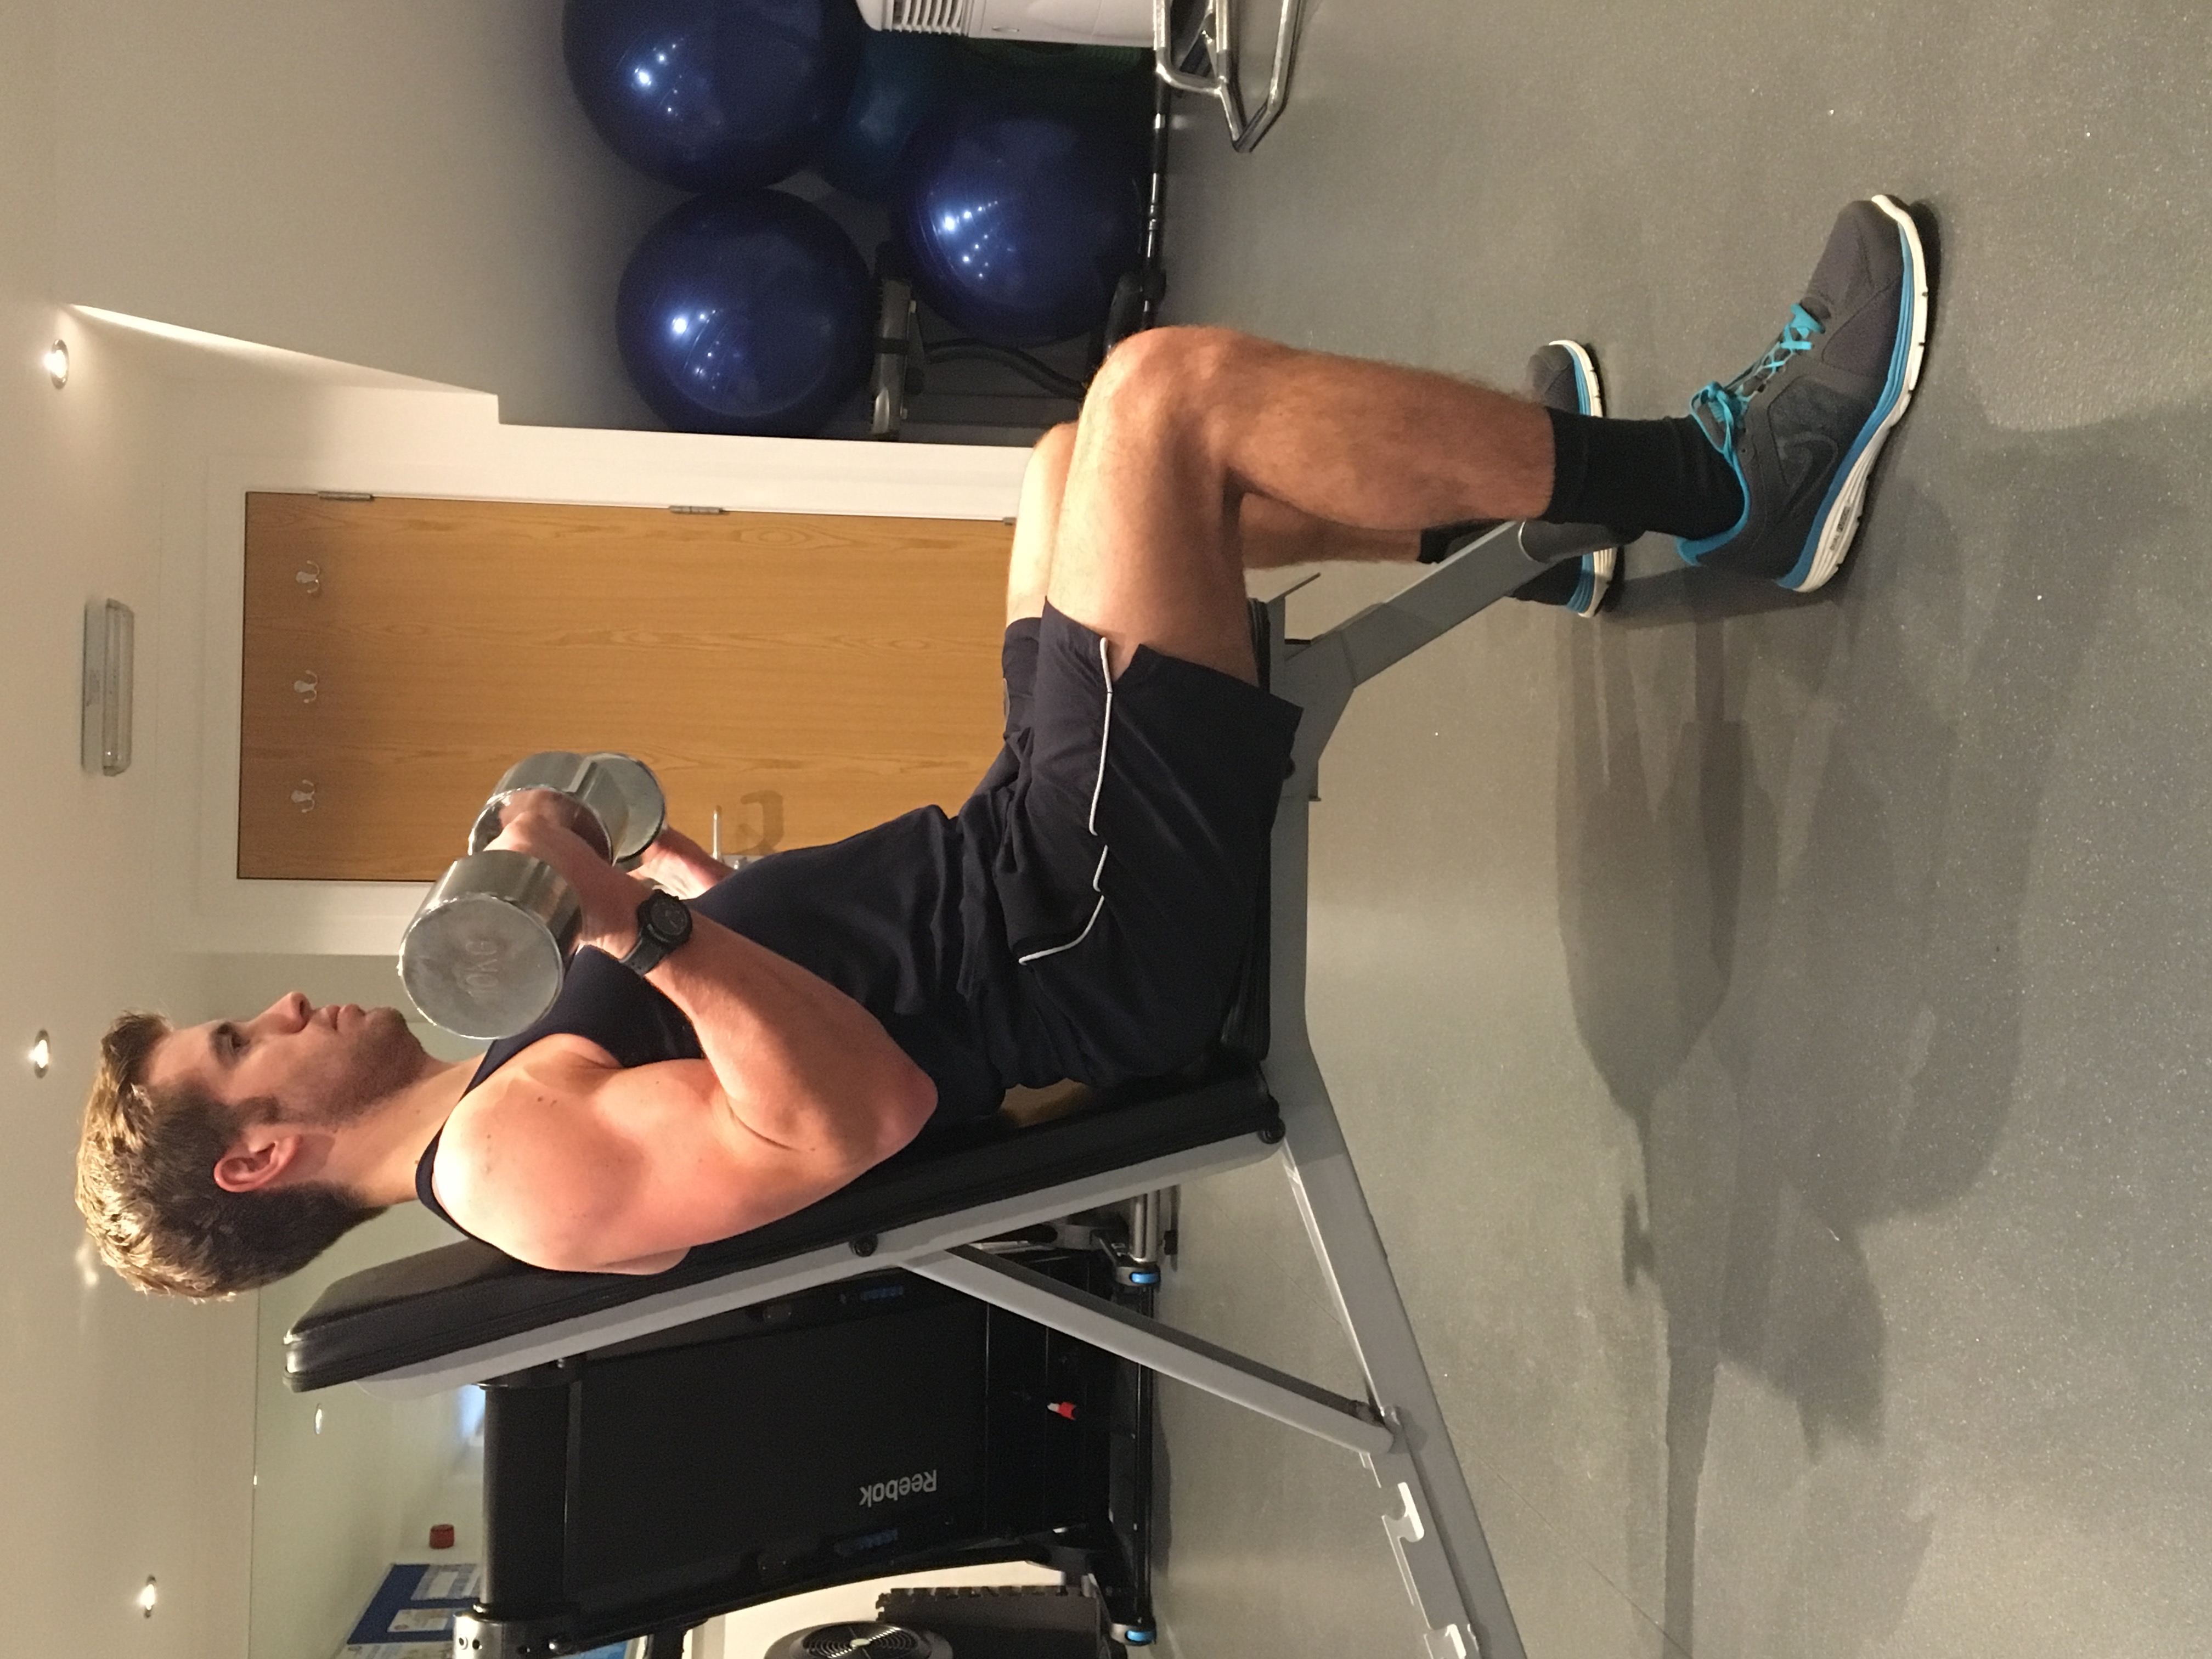 Seated Bicep Curl - G4 Physiotherapy & Fitness